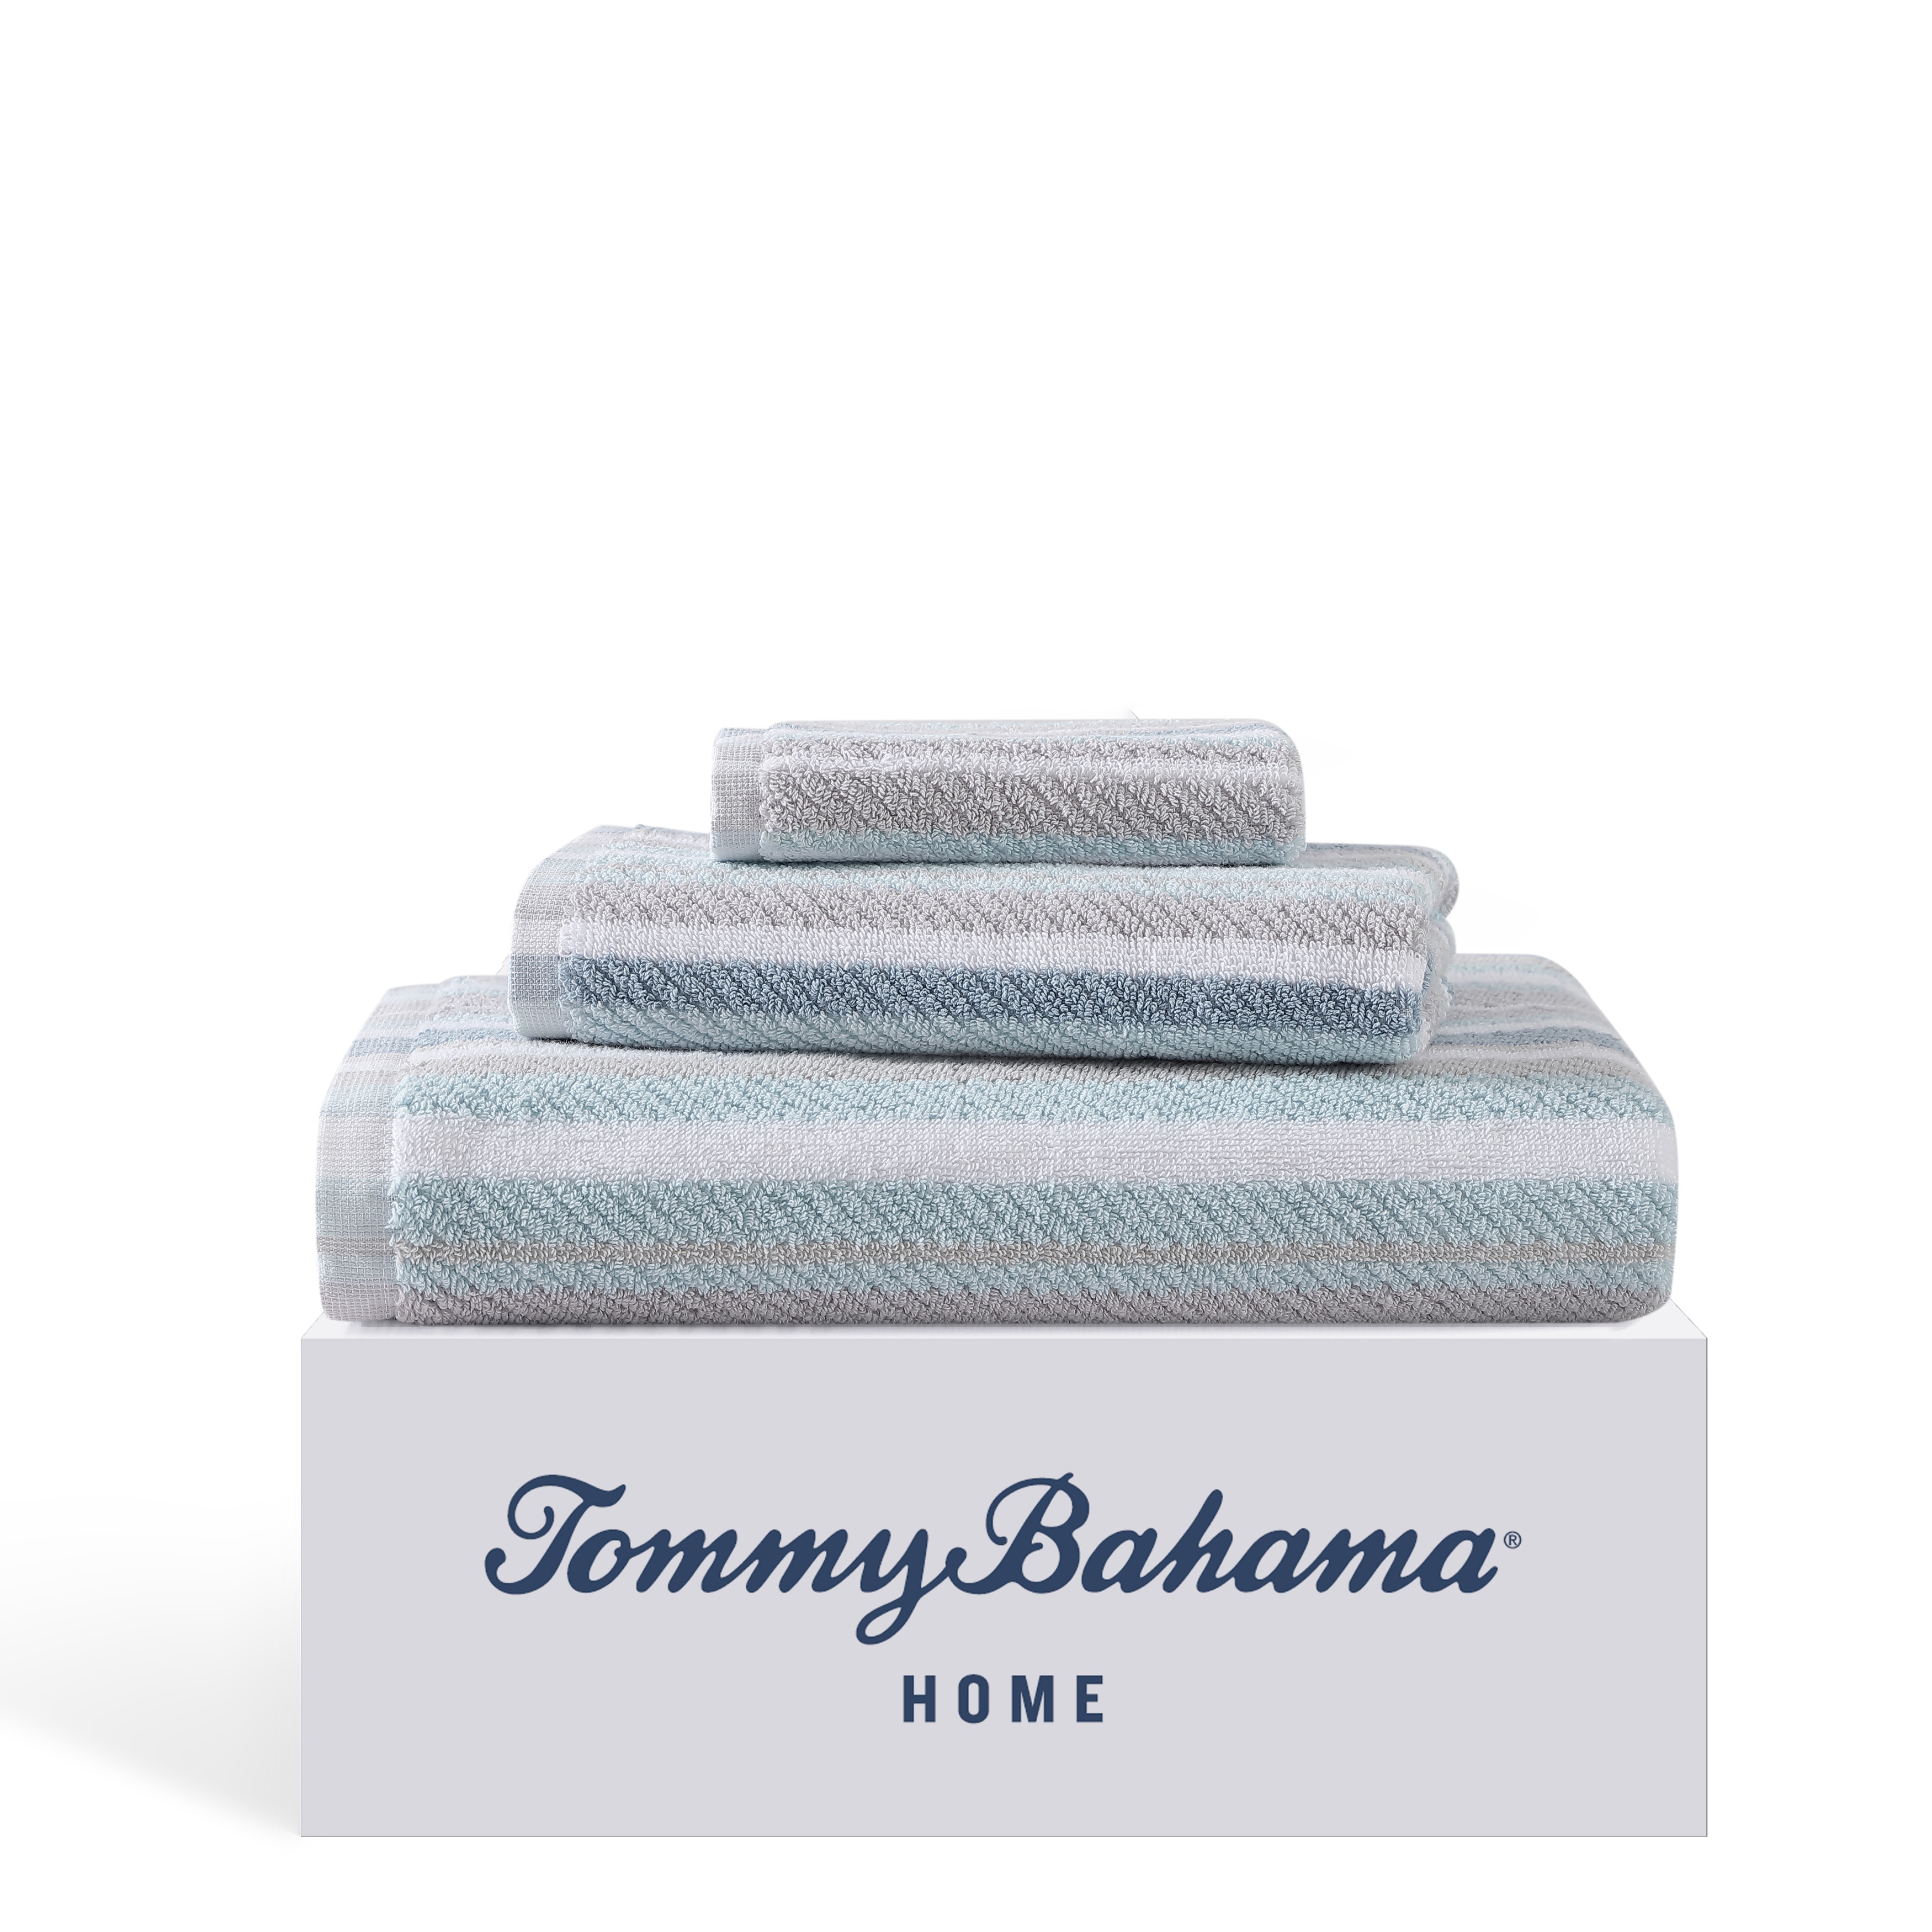 https://ak1.ostkcdn.com/images/products/is/images/direct/8b9aefc9756f5091f9eadd4e3e8519065c636ad9/Tommy-Bahama-Ocean-Bay-Stripe-Blue-Cotton-Terry-3-Piece-Towel-Set.jpg